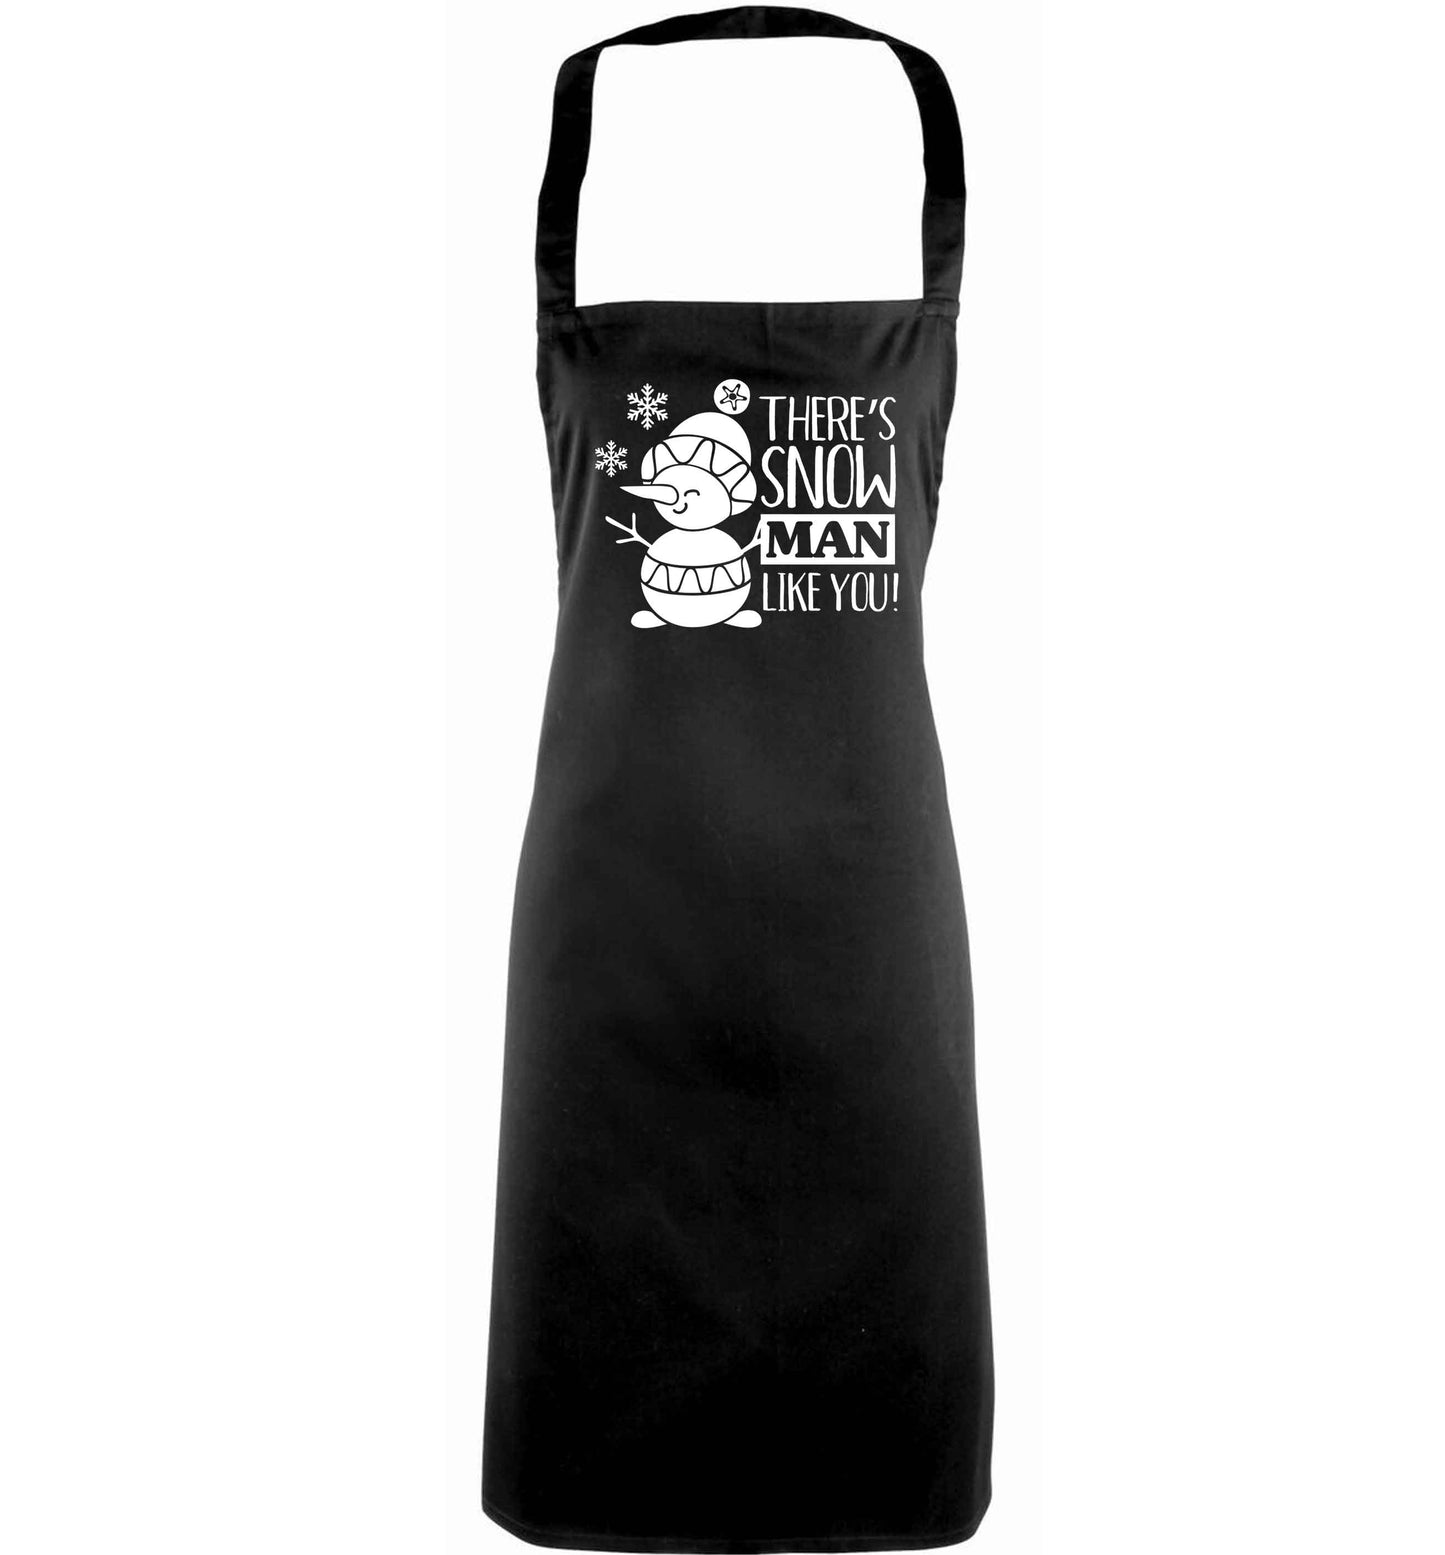 There's snow man like you adults black apron